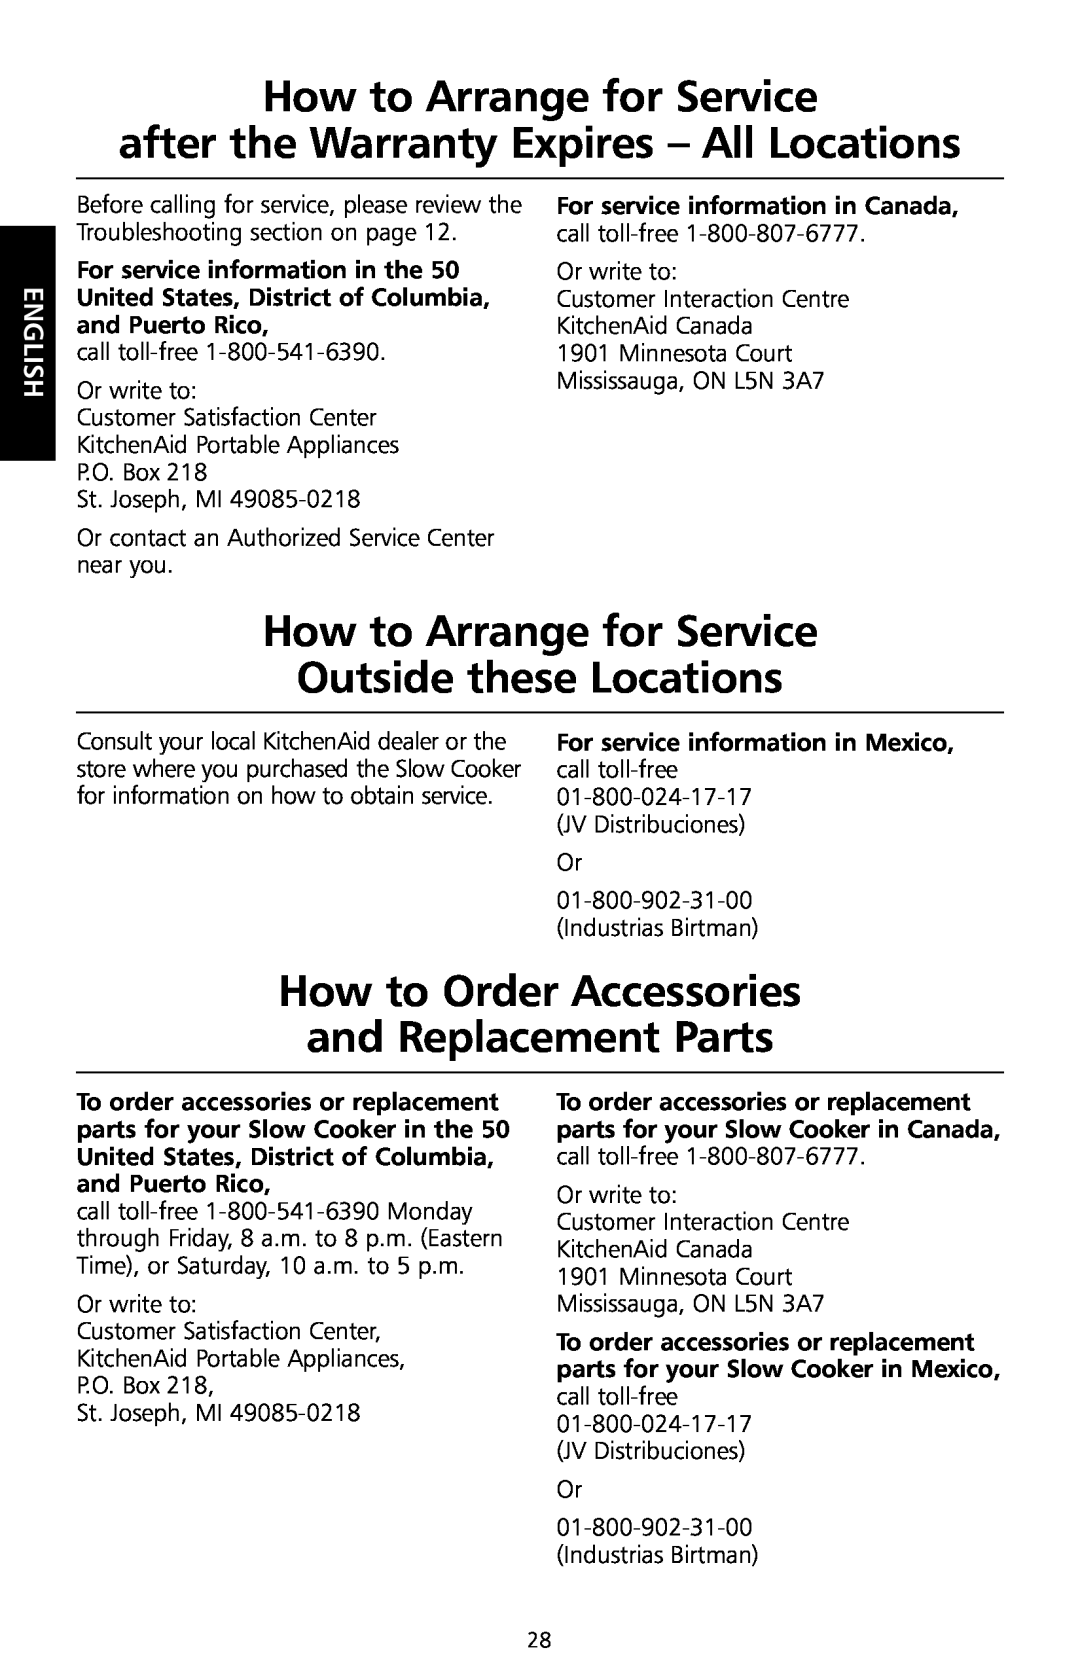 KitchenAid KSC700 manual How to Arrange for Service after the Warranty Expires - All Locations, English 